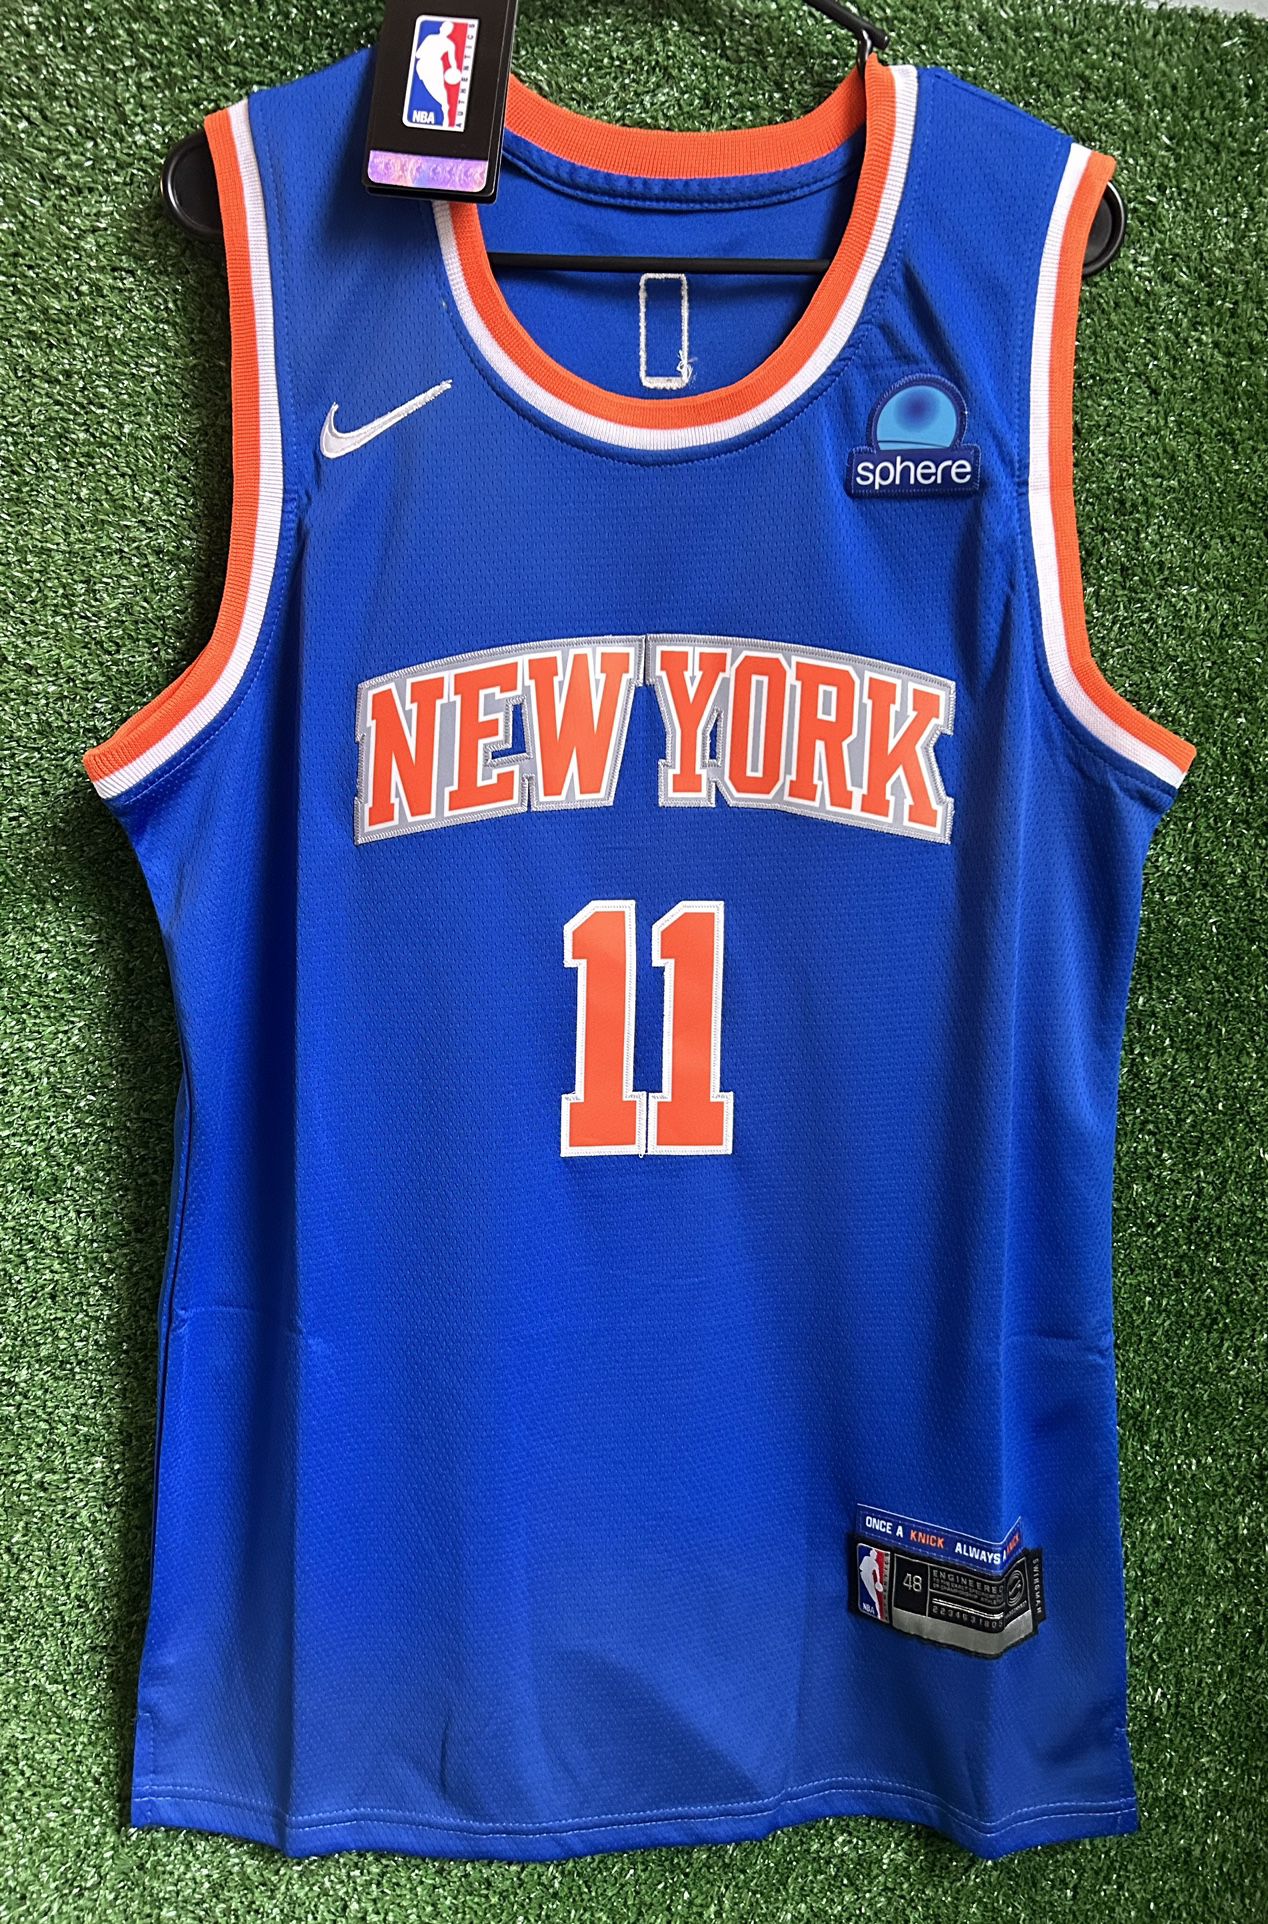 JALEN BRUNSON NEW YORK KNICKS NIKE JERSEY BRAND NEW WITH TAGS SIZES MEDIUM, LARGE AND XL AVAILABLE 